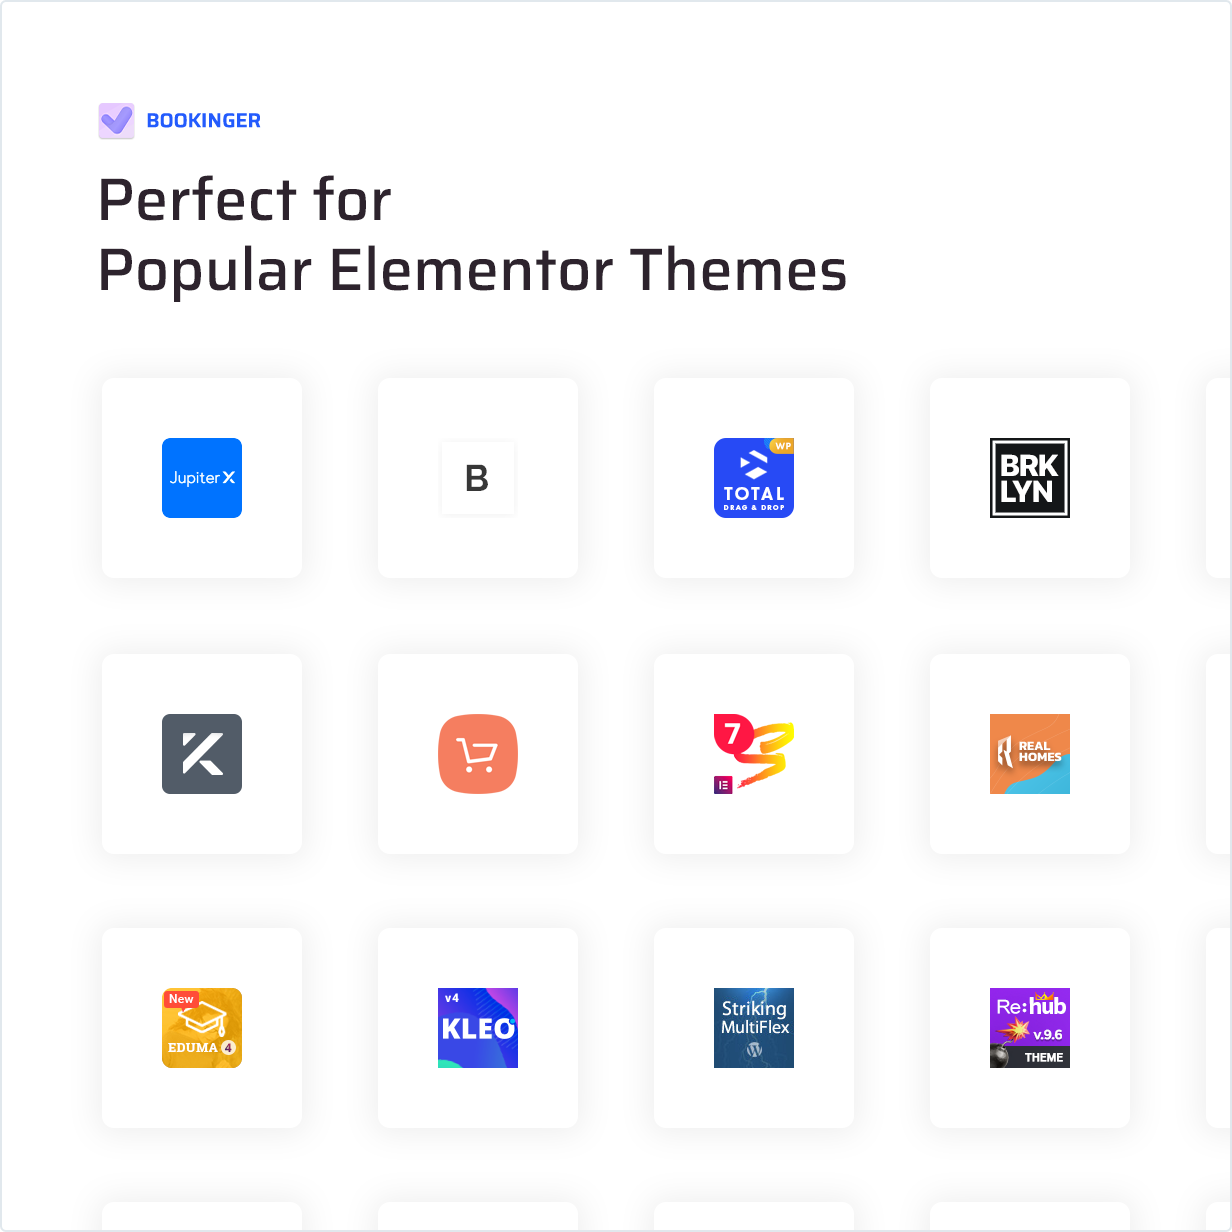 Perfect for Popular Elementor Themes